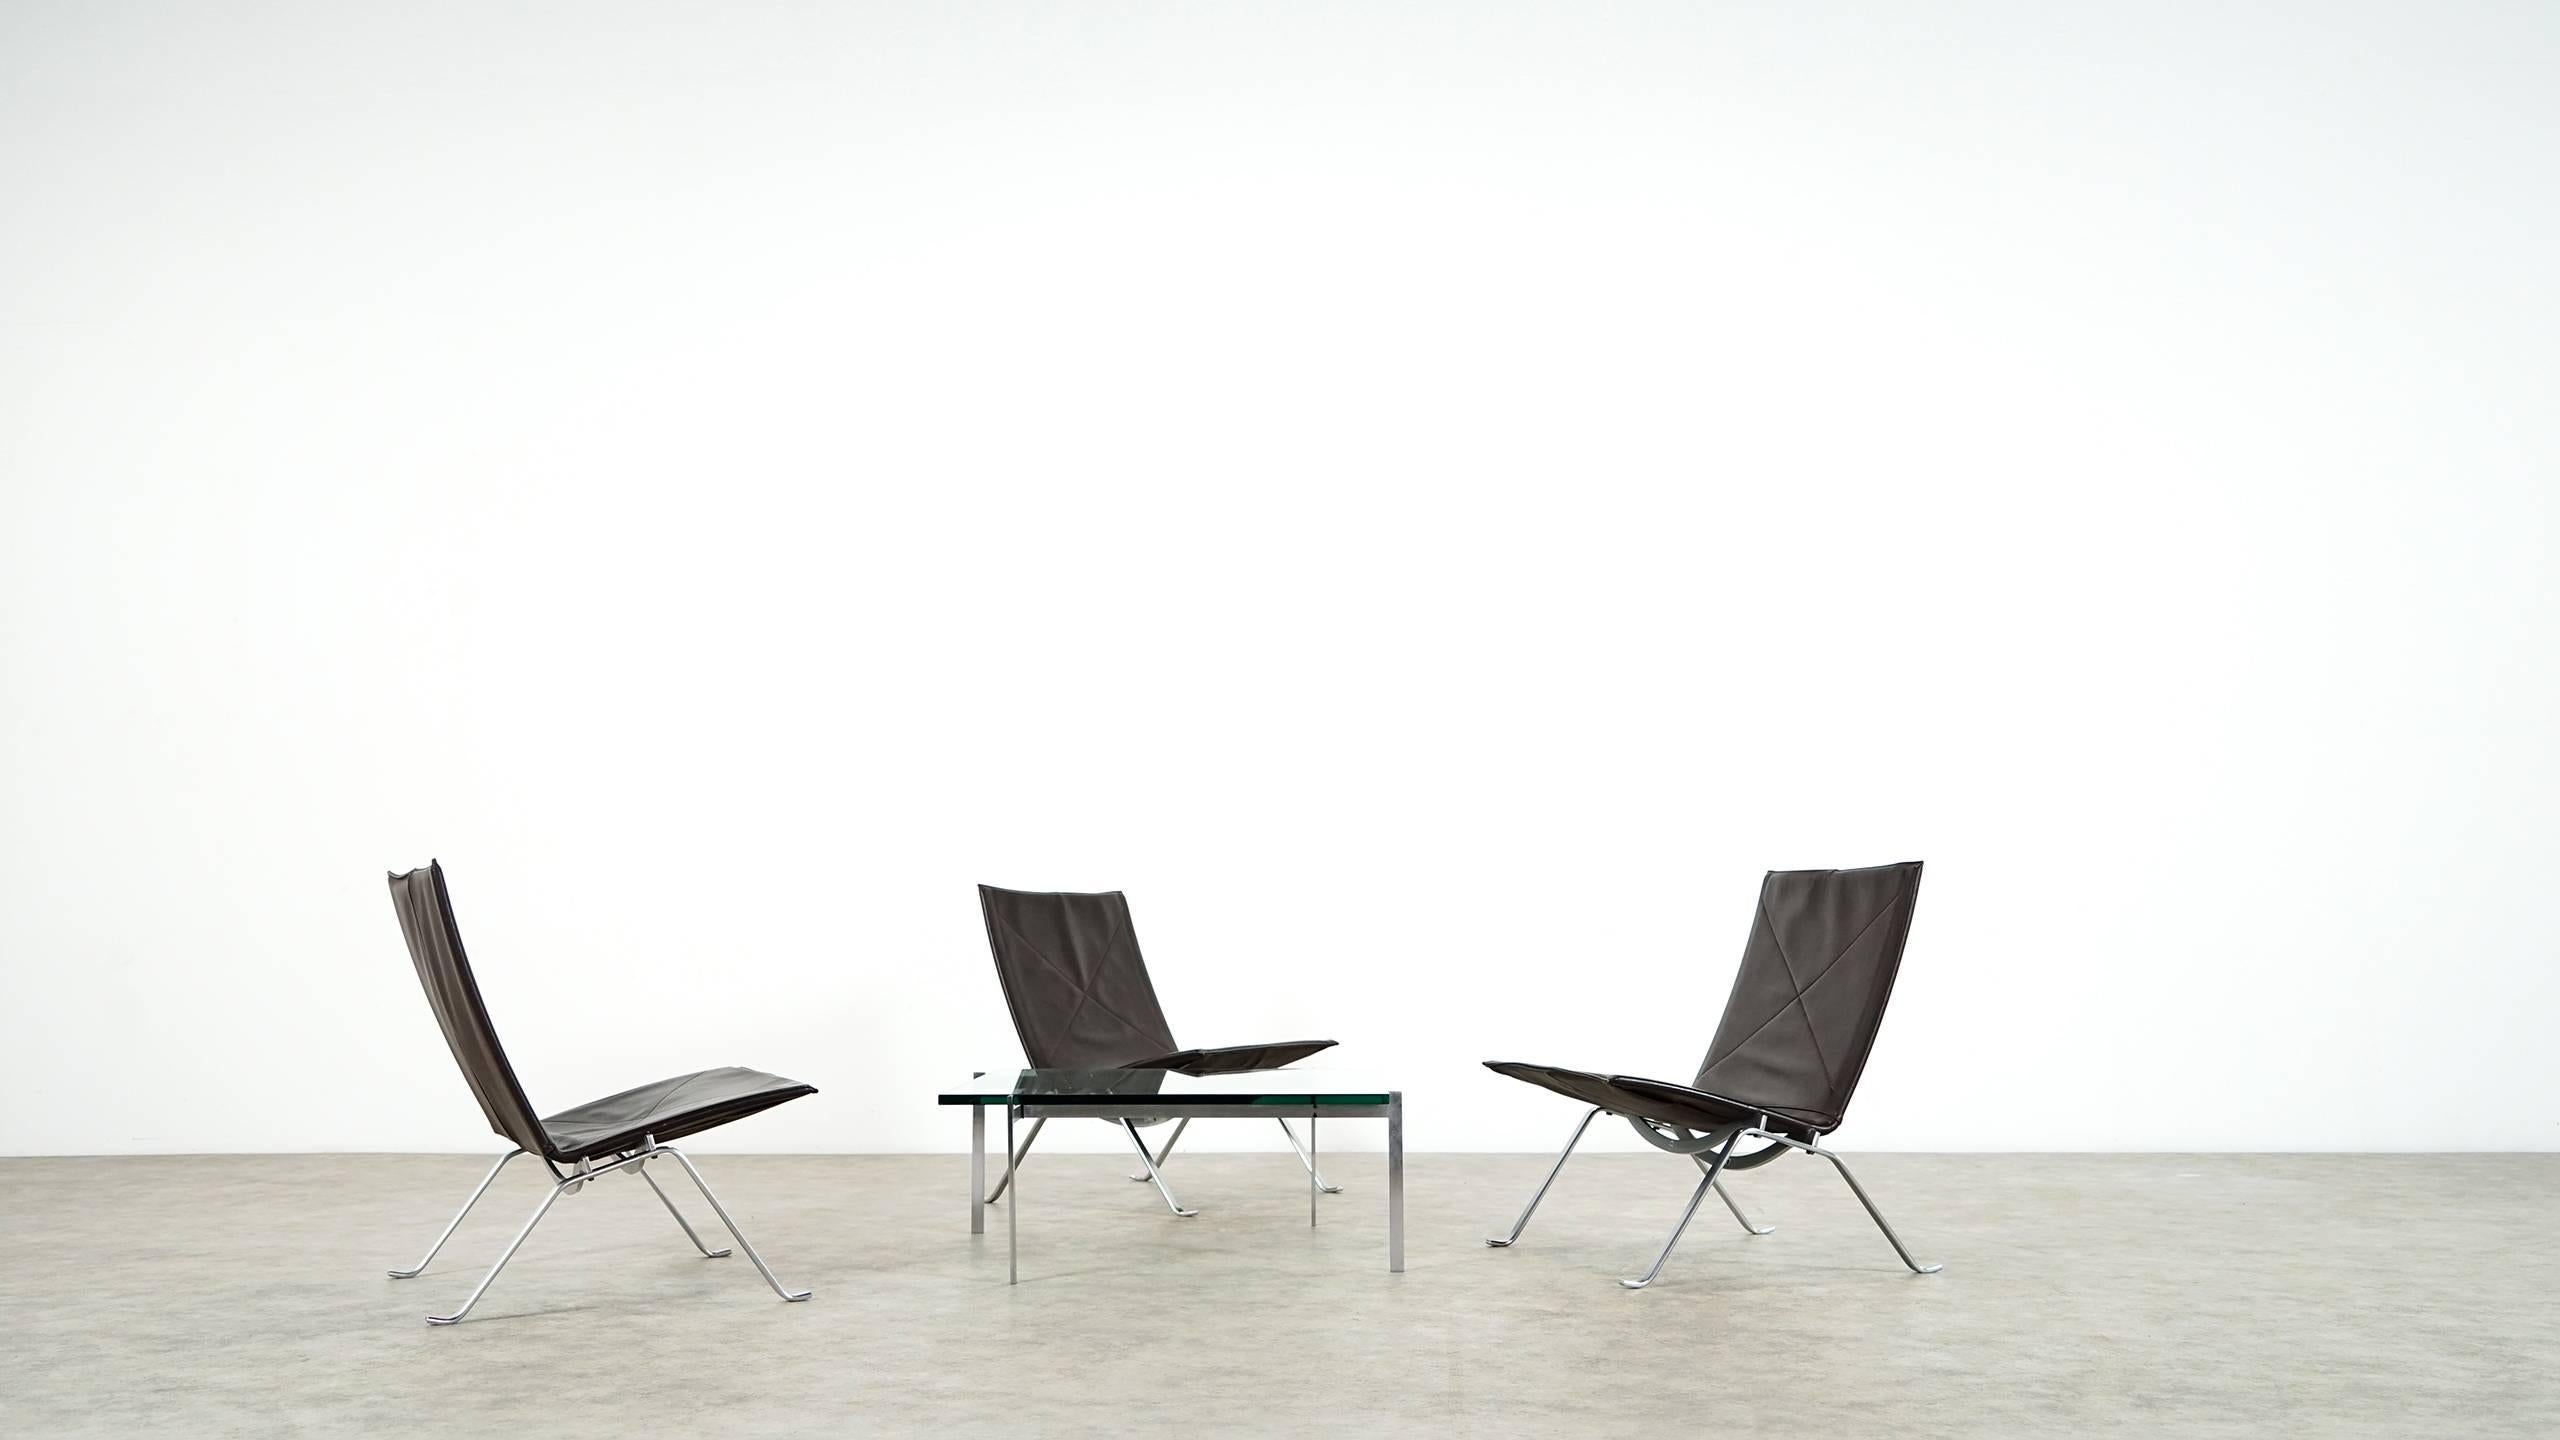 The discrete and elegant lounge chair PK22 epitomizes the work of Poul Kjærholm and his search for the ideal type-form and industrial dimension, which was always present in his work. 

This offer is for two near-to-perfect PK22 lounge chairs,